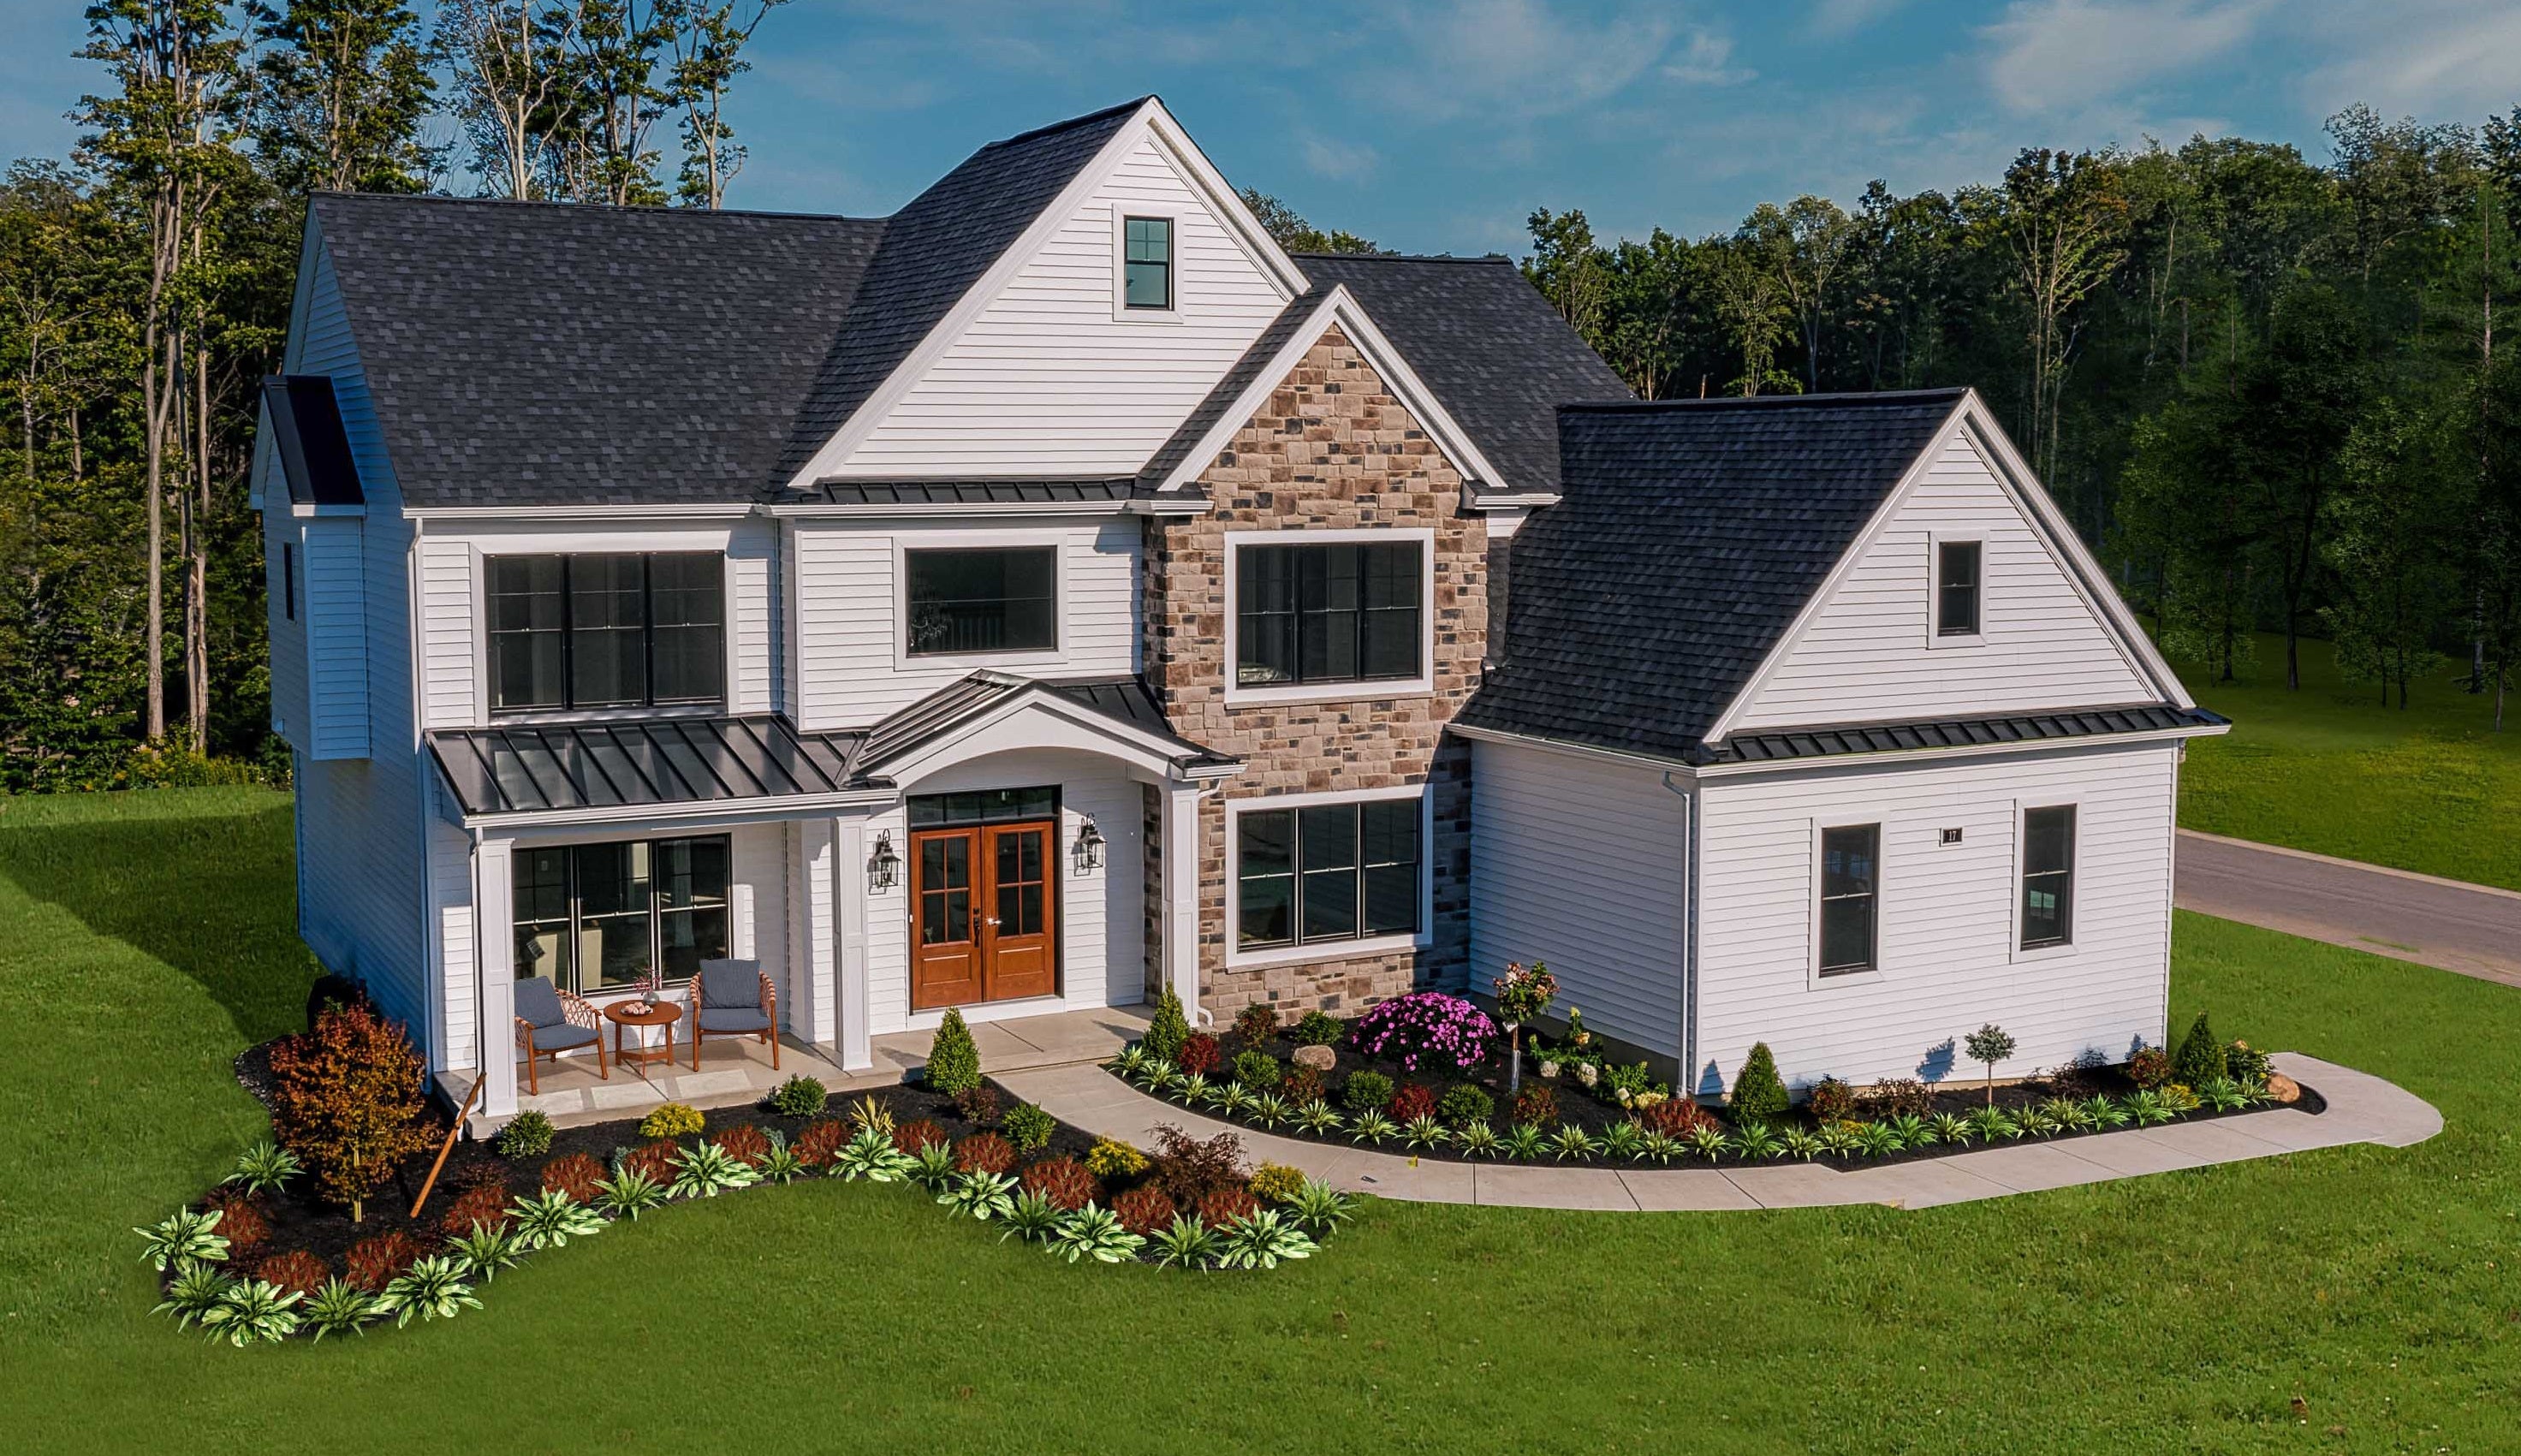 New Homes in Orchard Park, NY